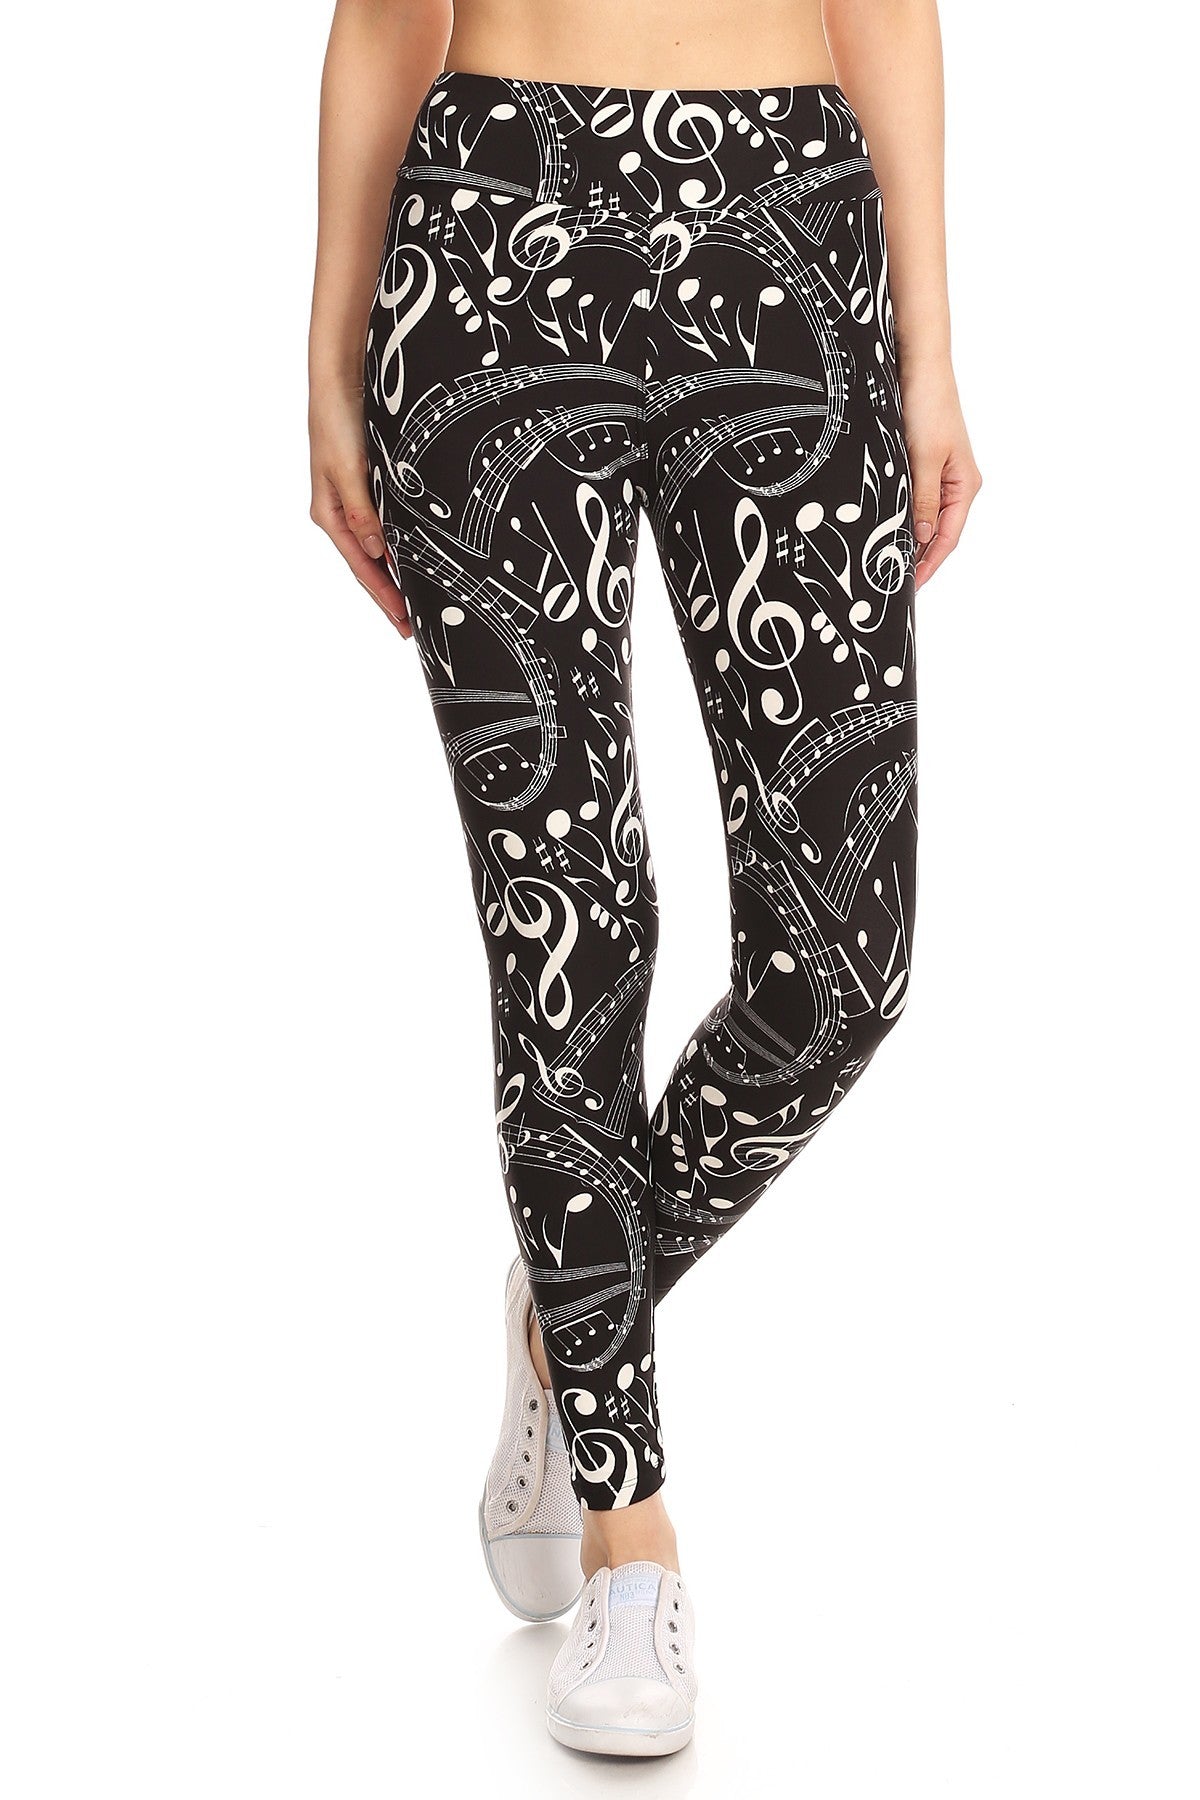 Yoga Style Banded Lined Music Note Print, Full Length Leggings In A Slim Fitting Style With A Banded High Waist - Love It Clothing